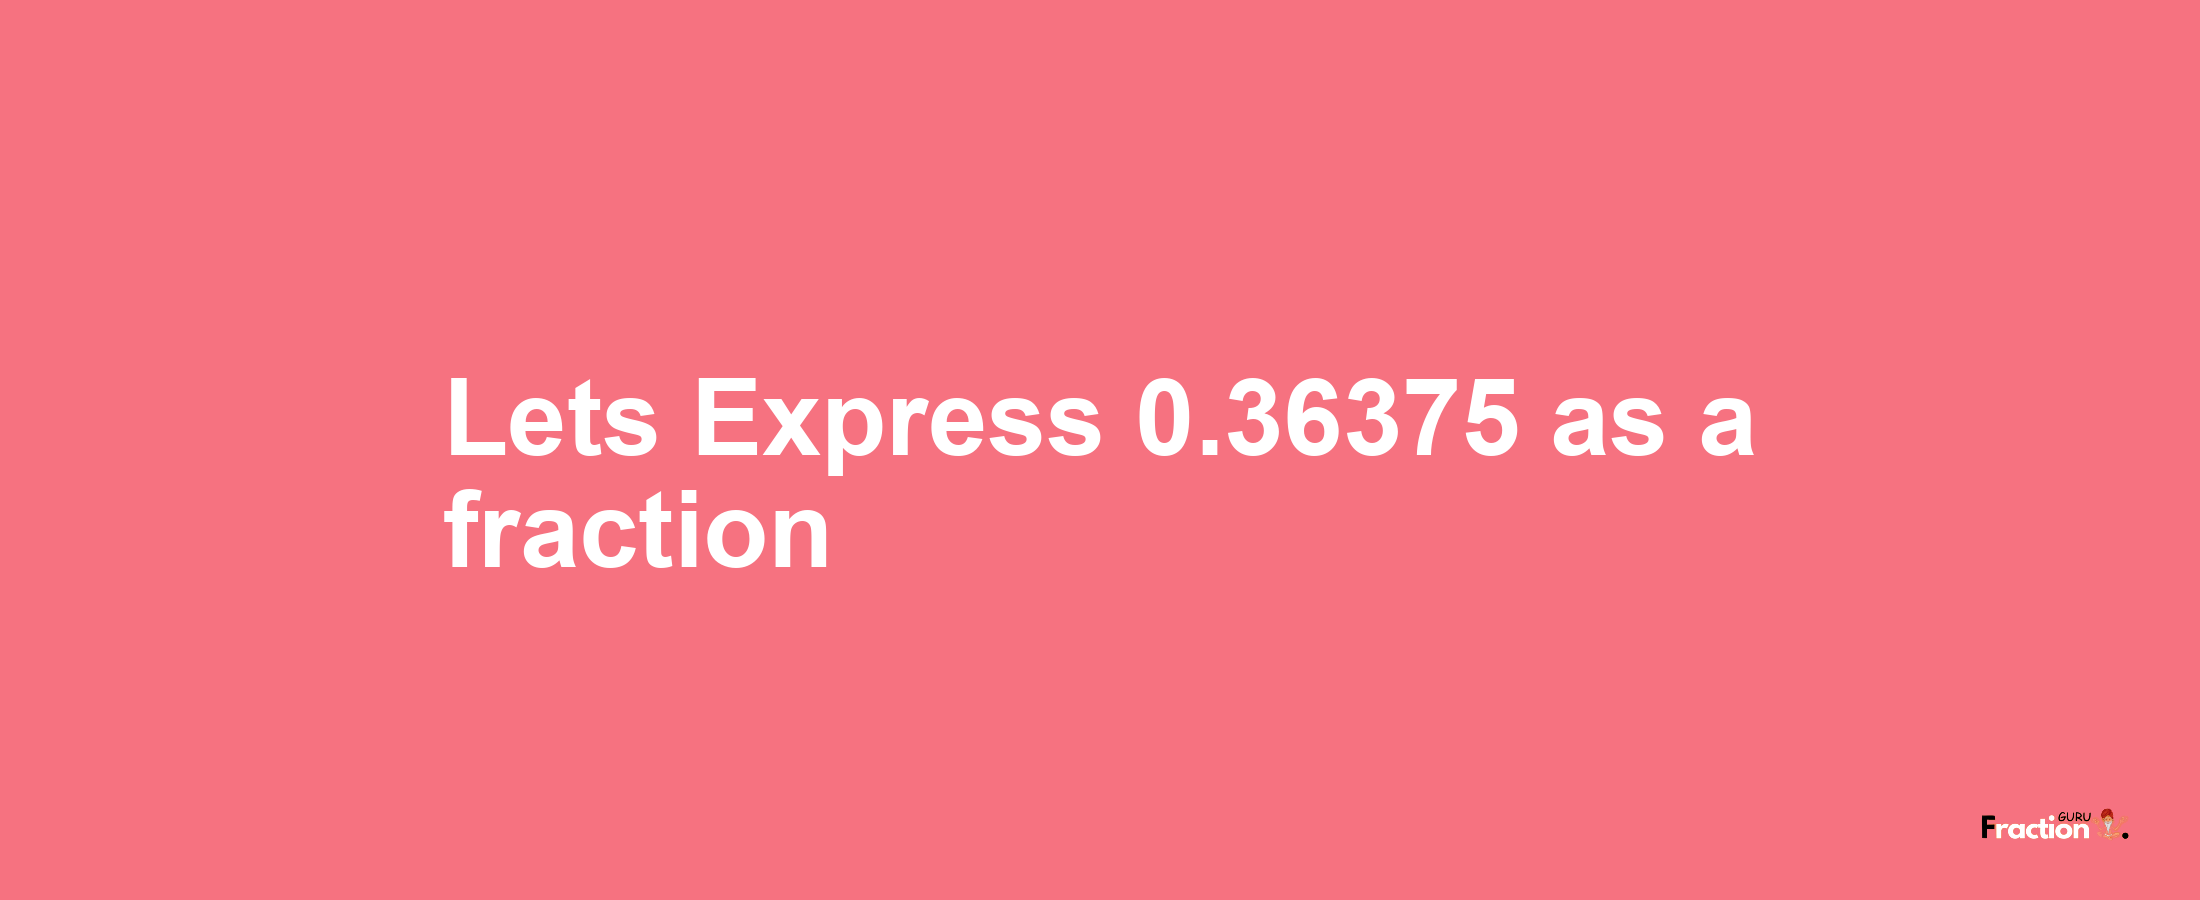 Lets Express 0.36375 as afraction